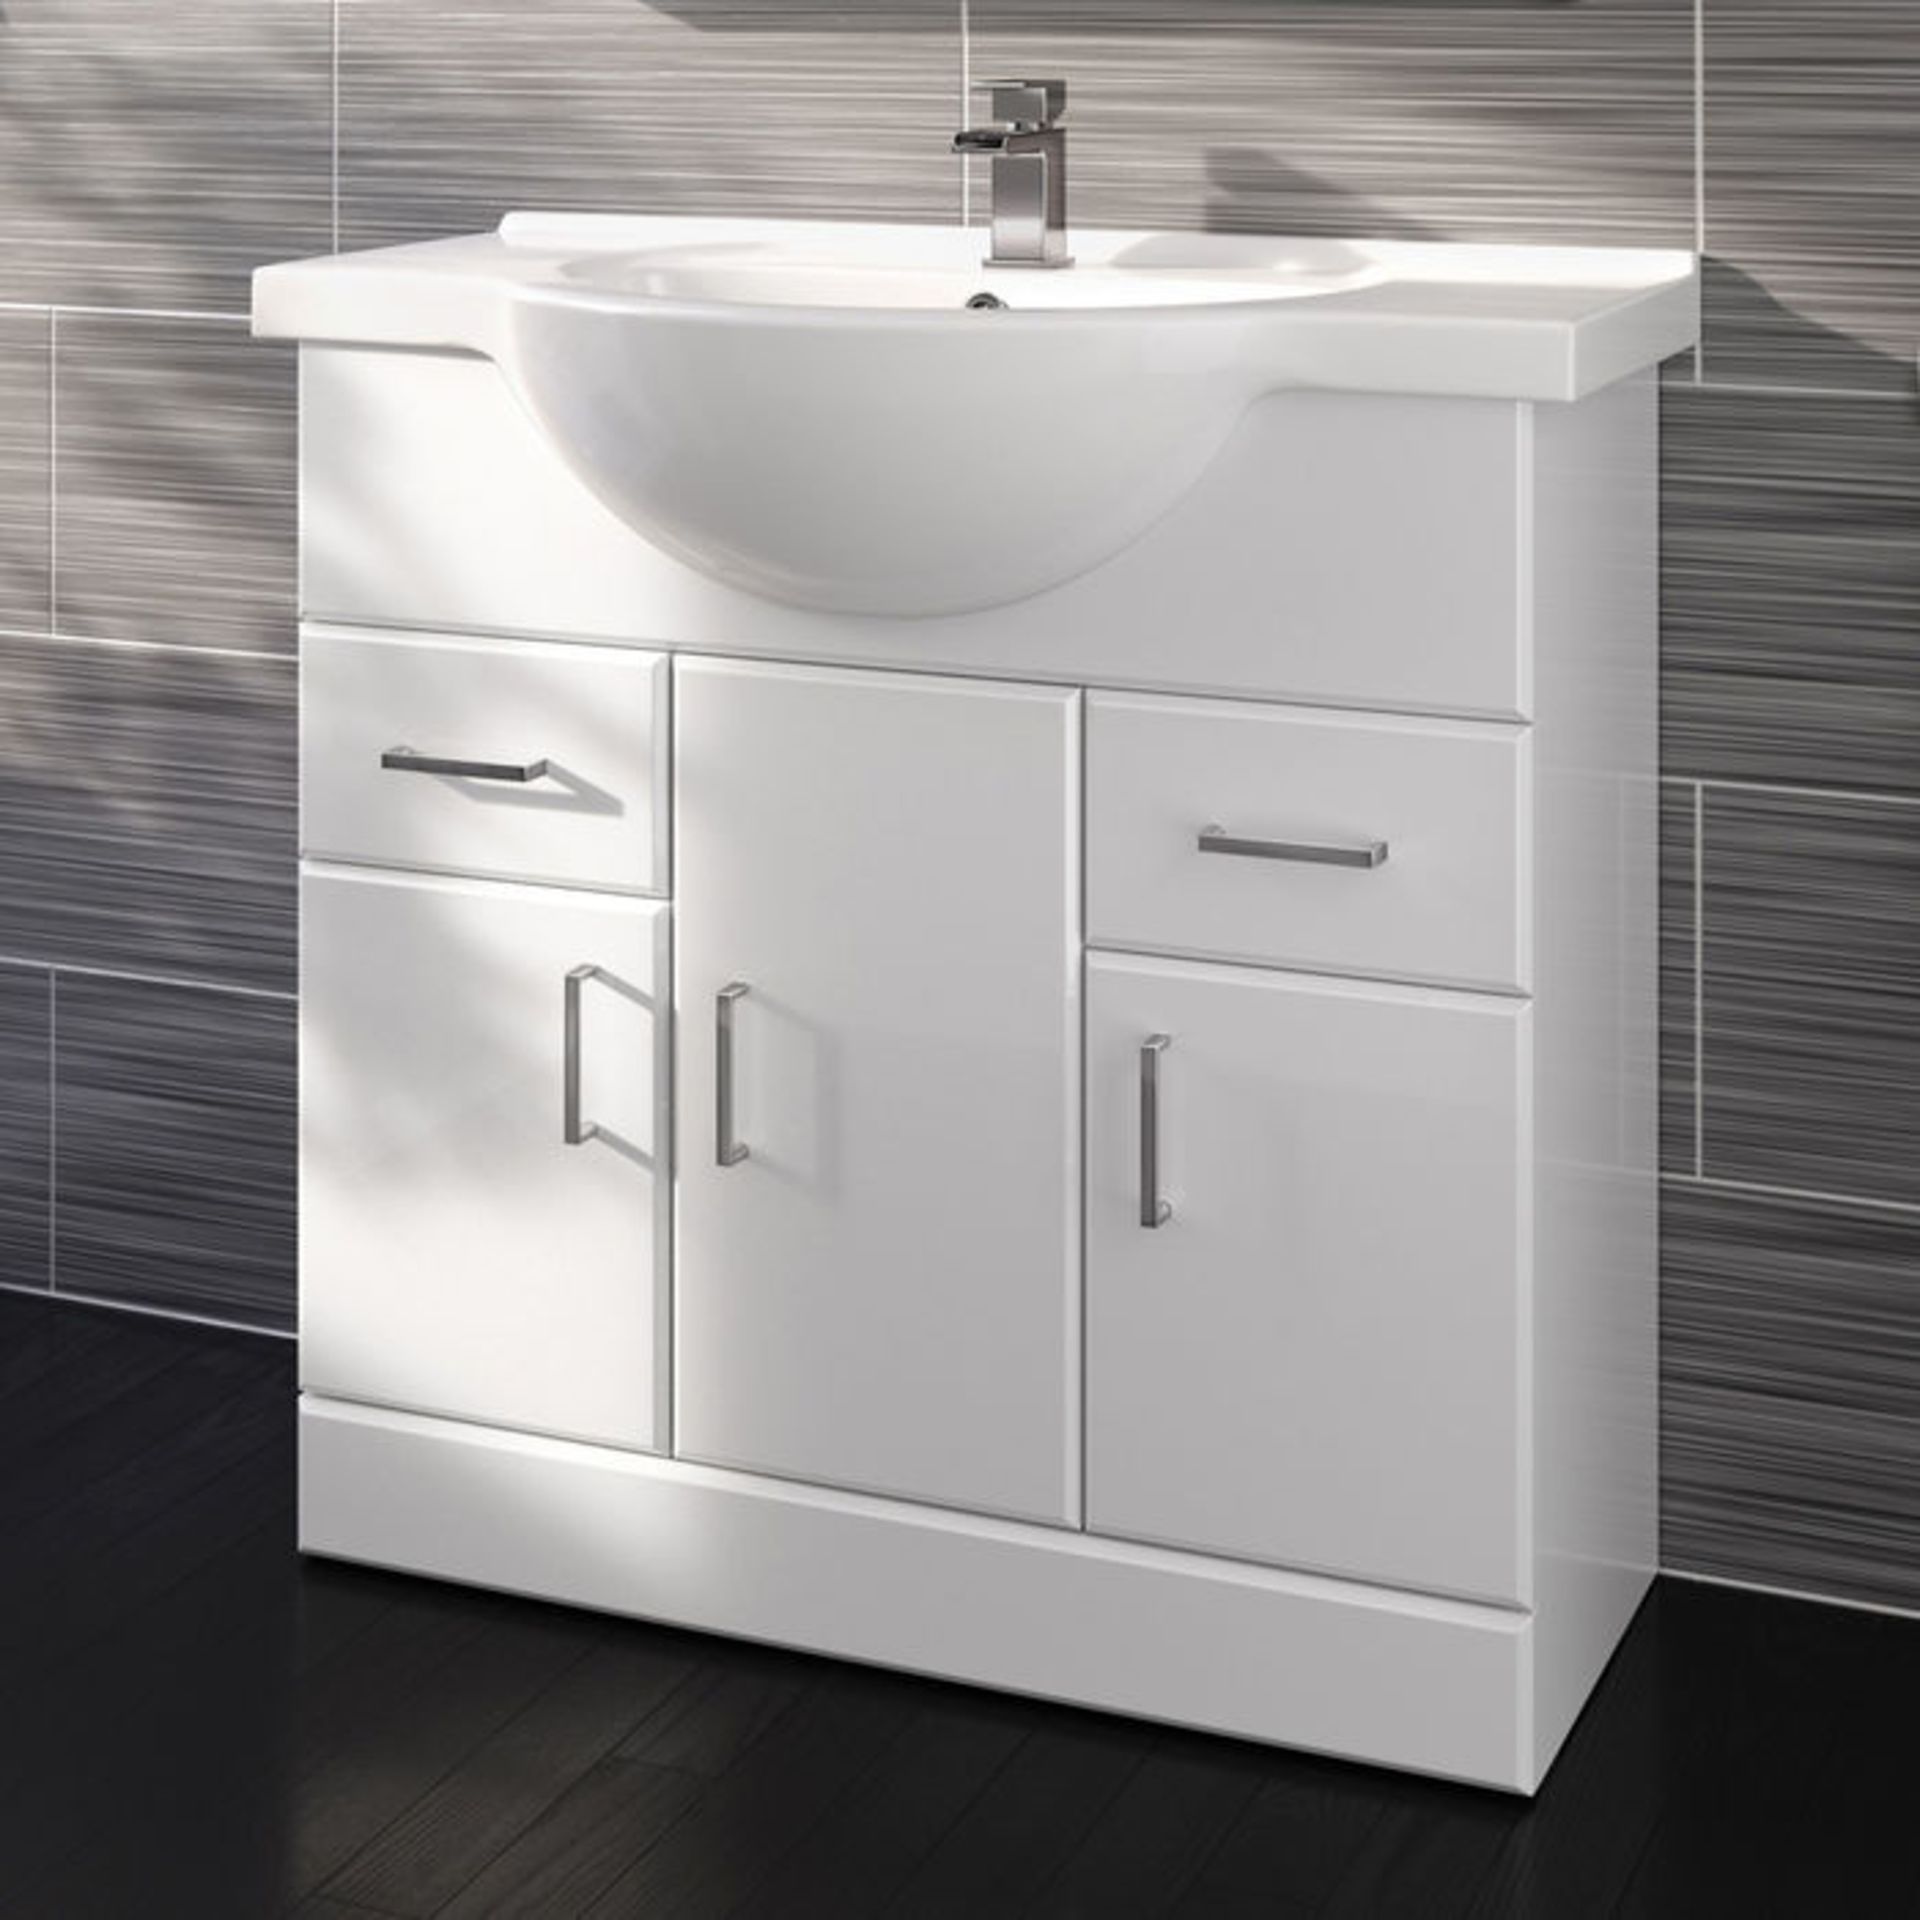 (G77) 850x330mm Quartz Gloss White Built In Basin Unit RRP £323.99. COMES COMPLETE WITH BASIN. Built